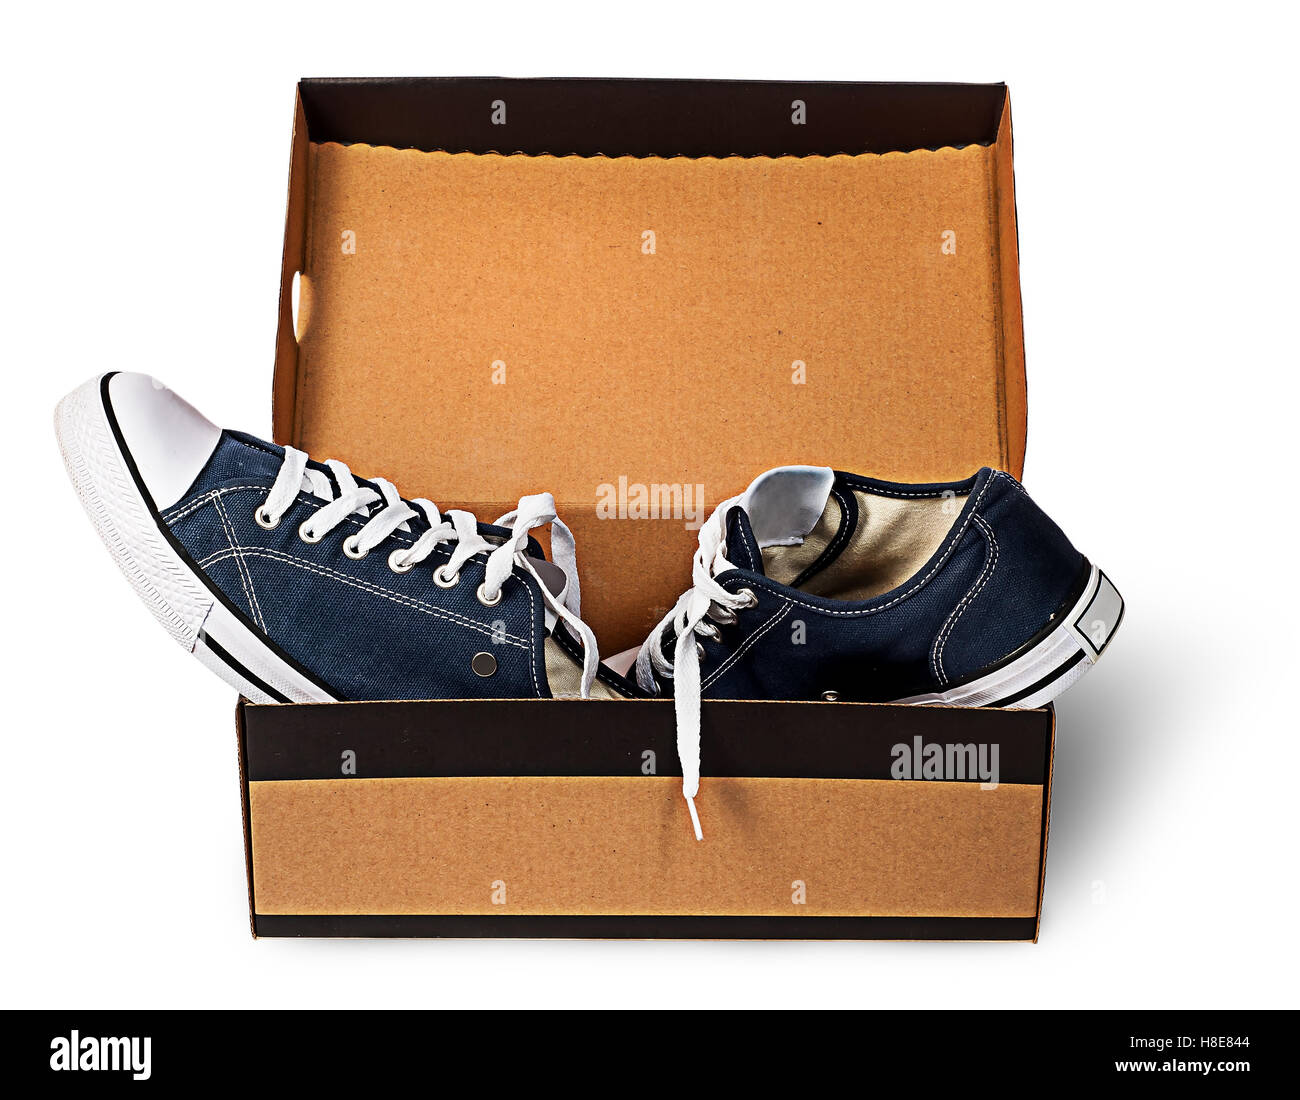 Dark blue sports shoes abandoned in a cardboard box isolated on white background Stock Photo